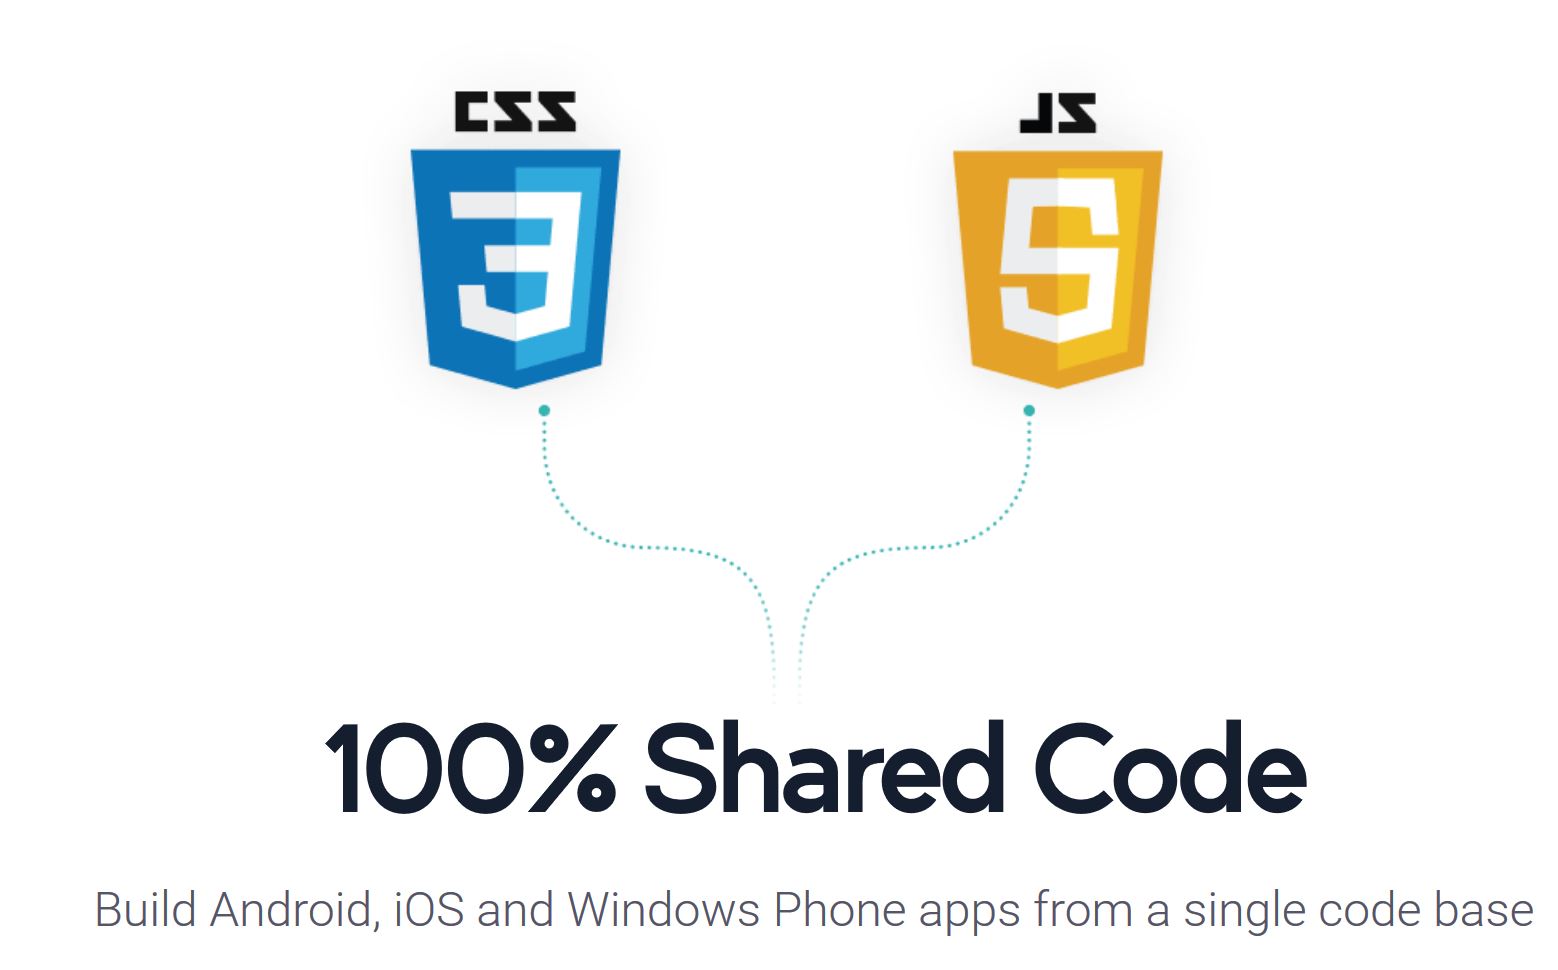 NativeScript Allows Developers To Use JavaScript To Build Native Windows Phone Apps